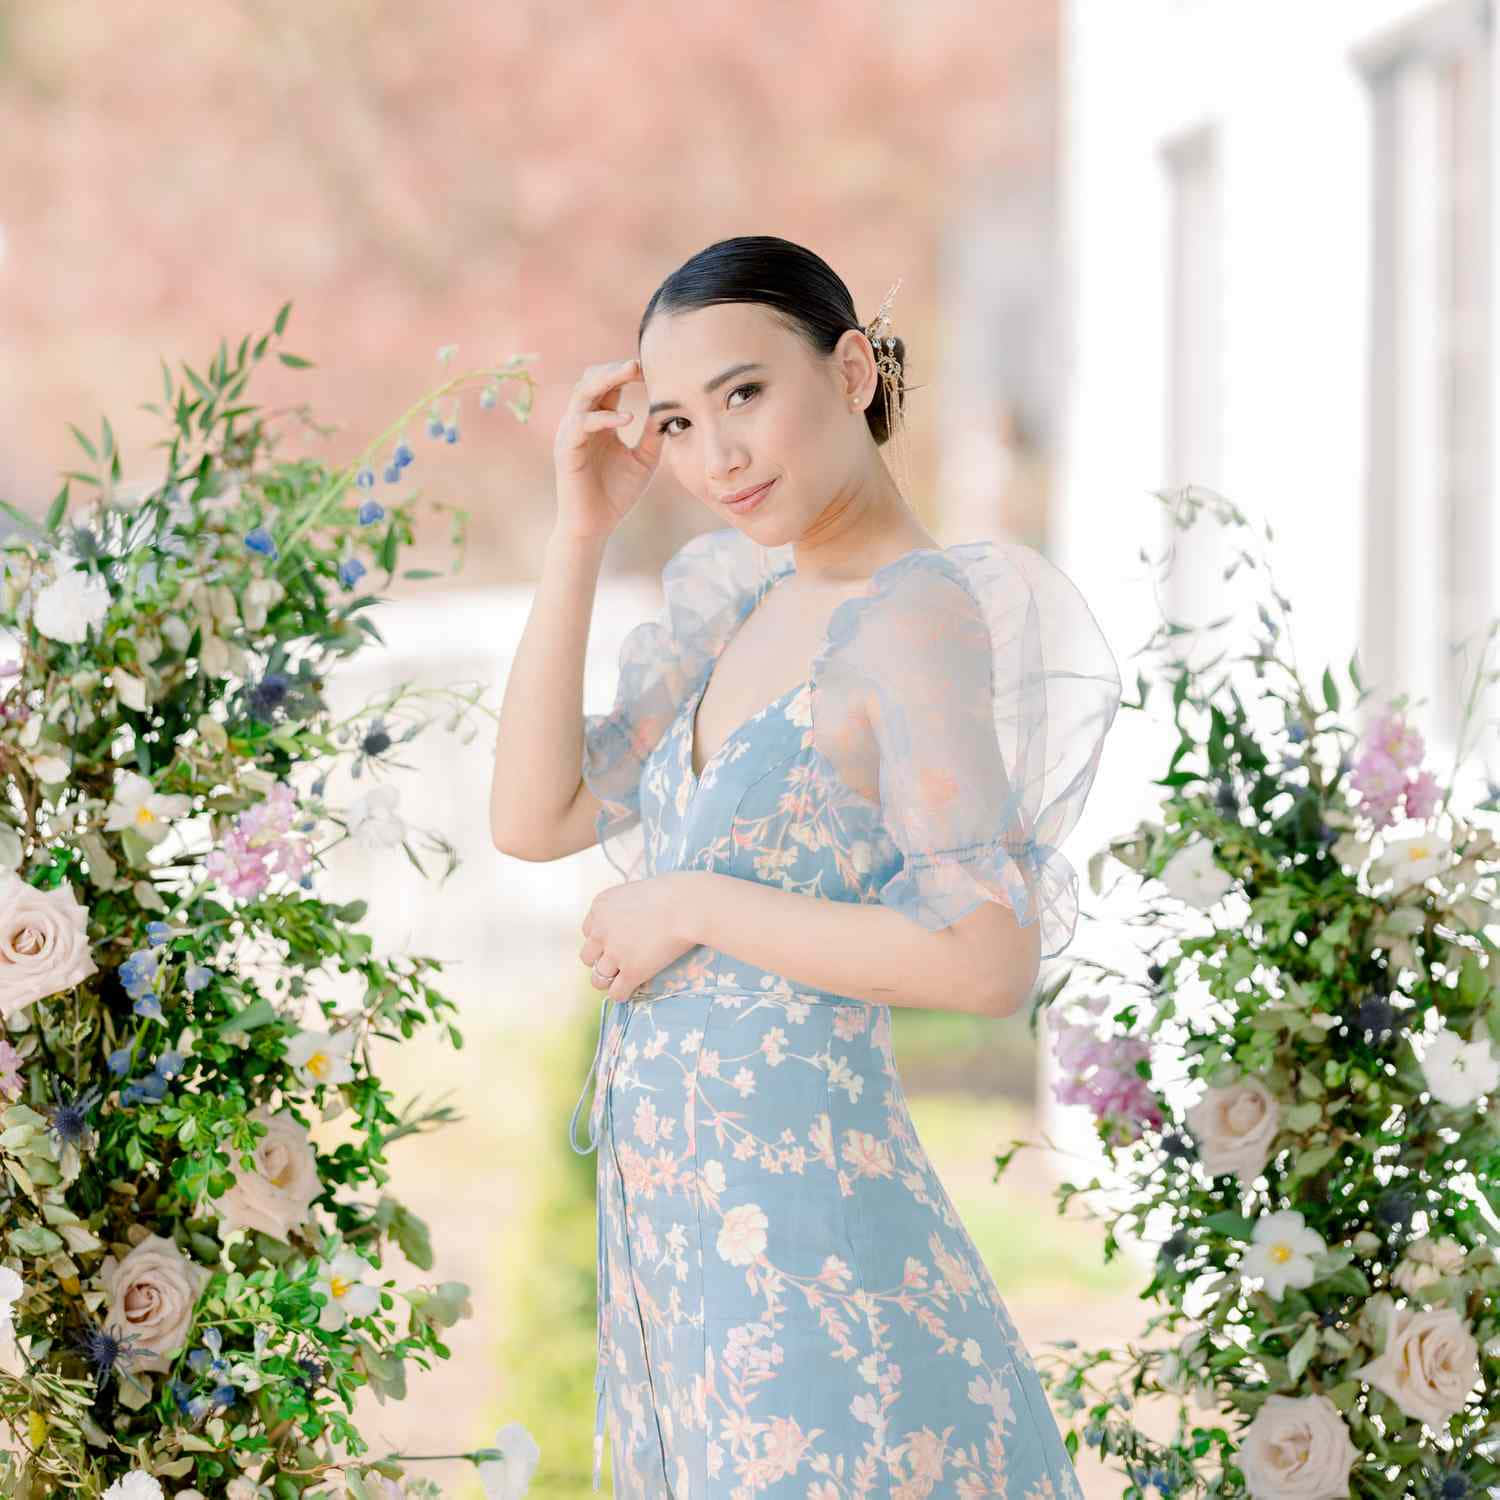 A Woman In A Blue Dress Posing In Front Of Flowers